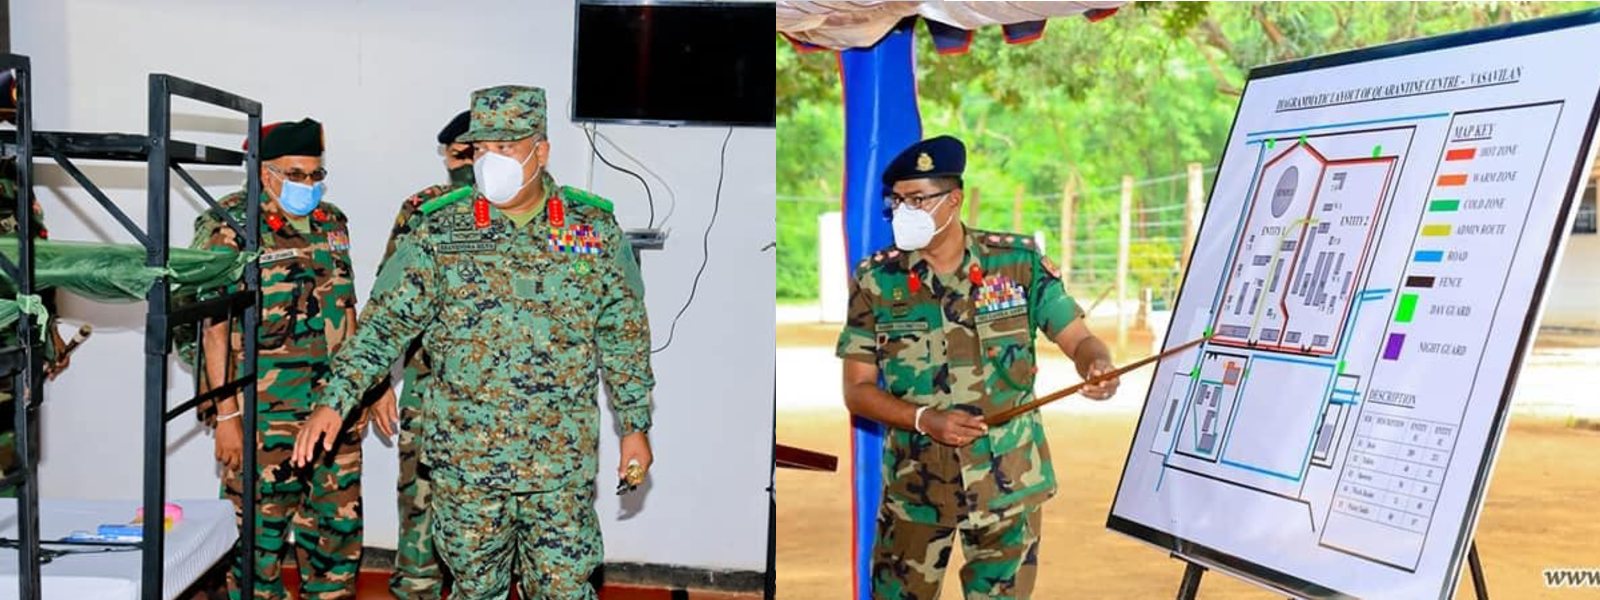 Army renovated QC ready in Jaffna